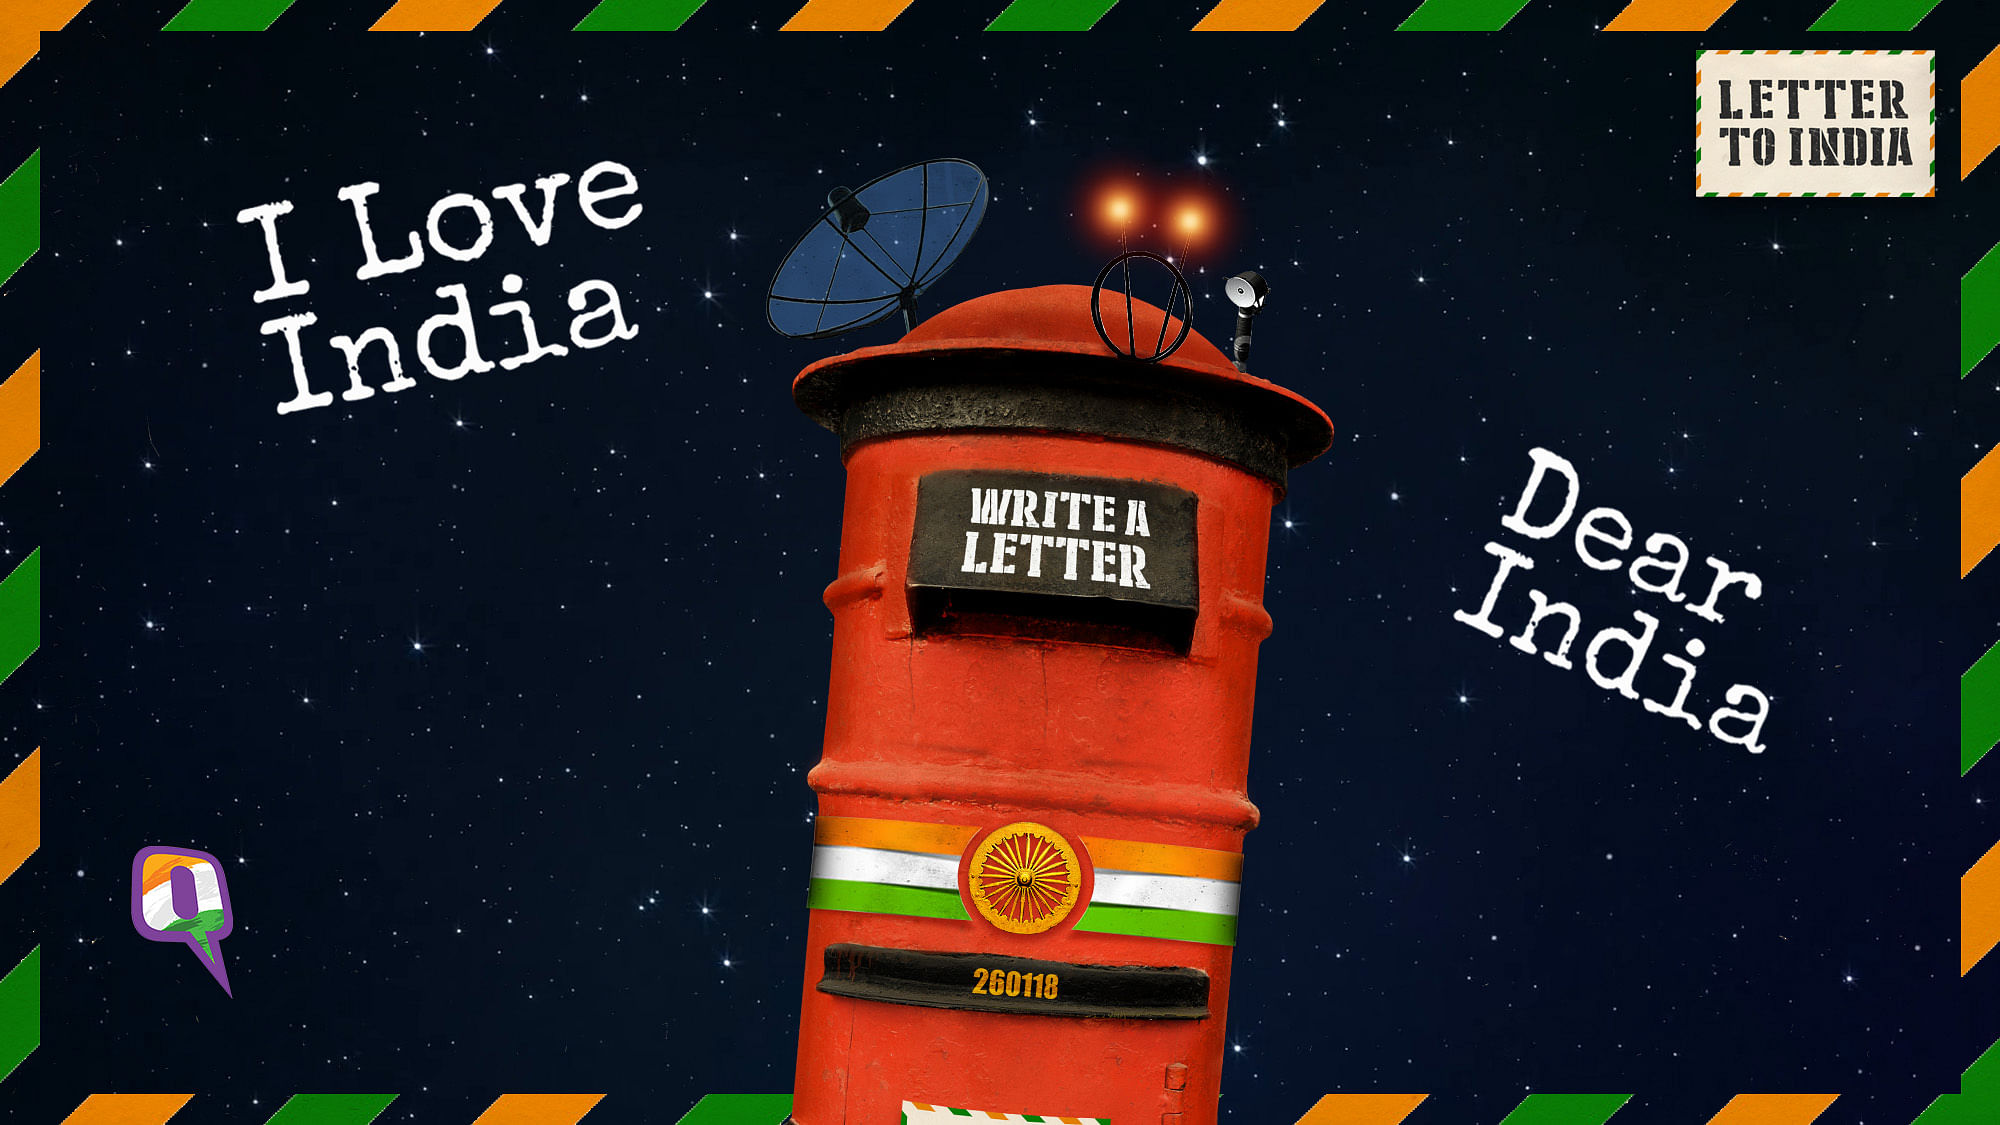 Feeling nostalgic or spoofy? Write a letter to India and pour your heart out. (Design: Harsh Sahani/<b>The Quint</b>)